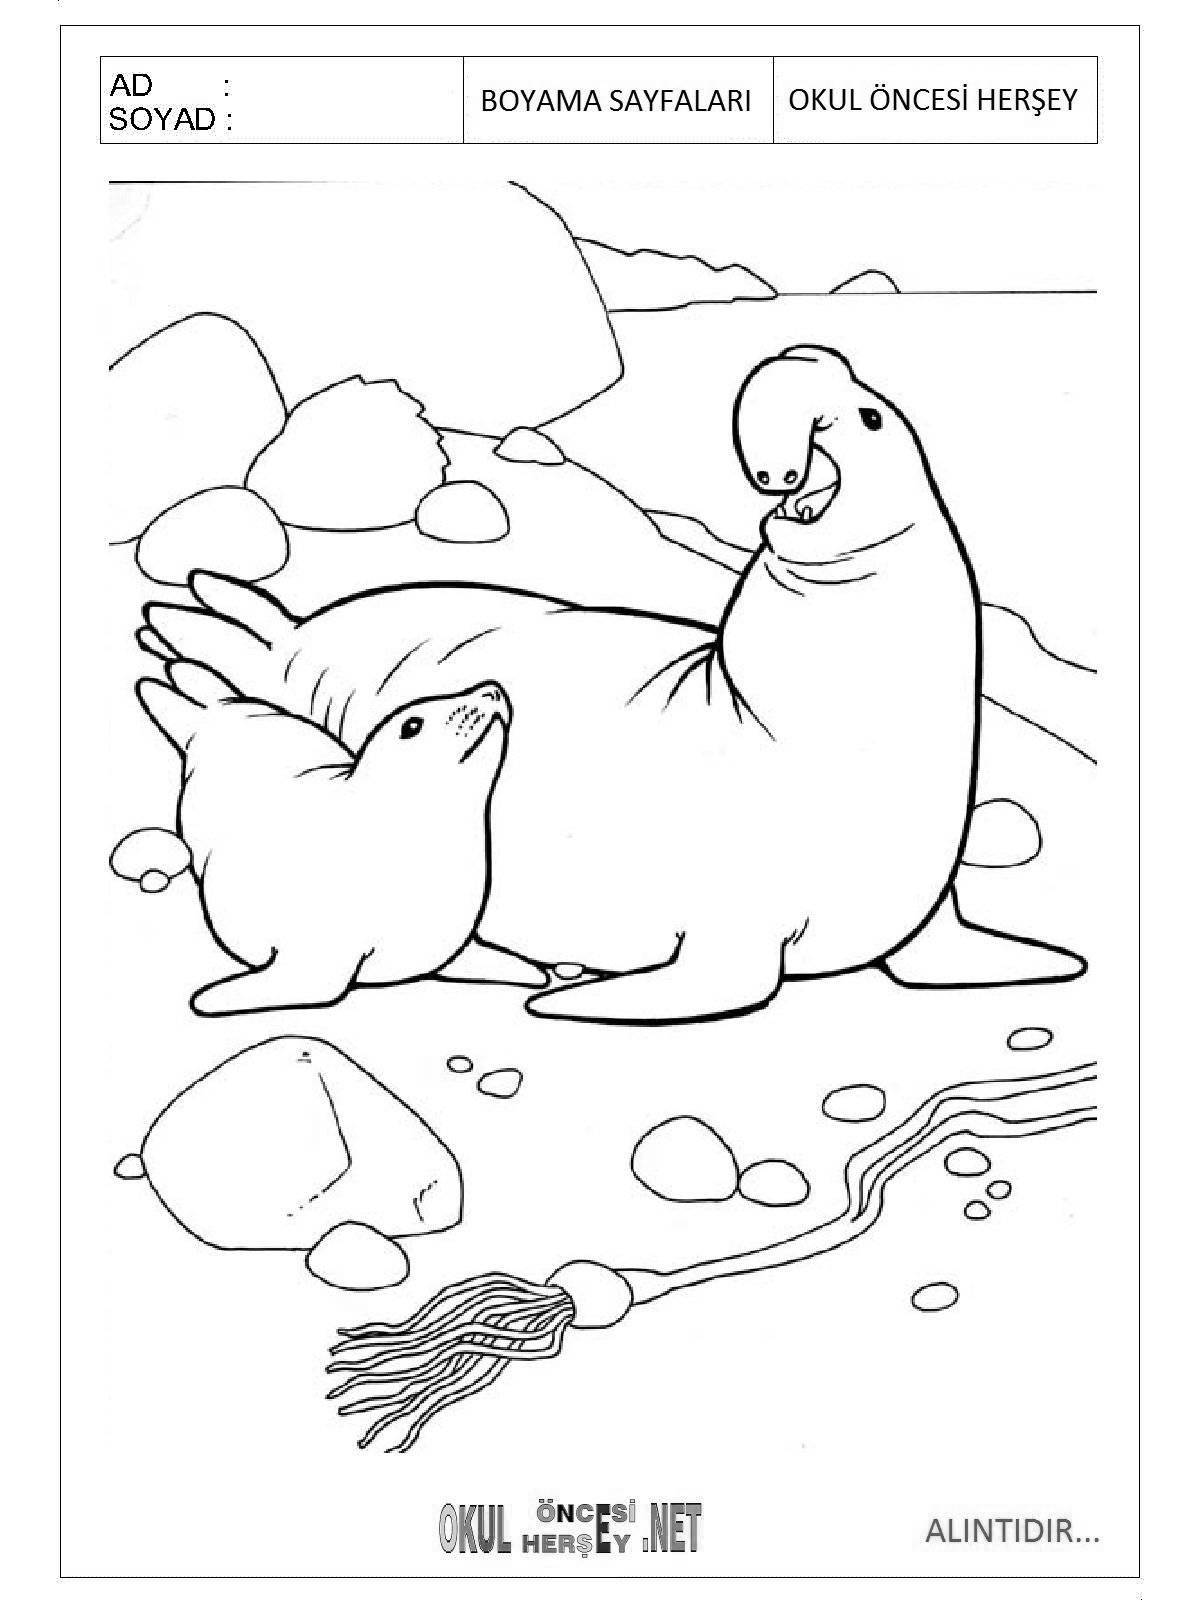 Colorful animals of antarctica coloring pages for kids